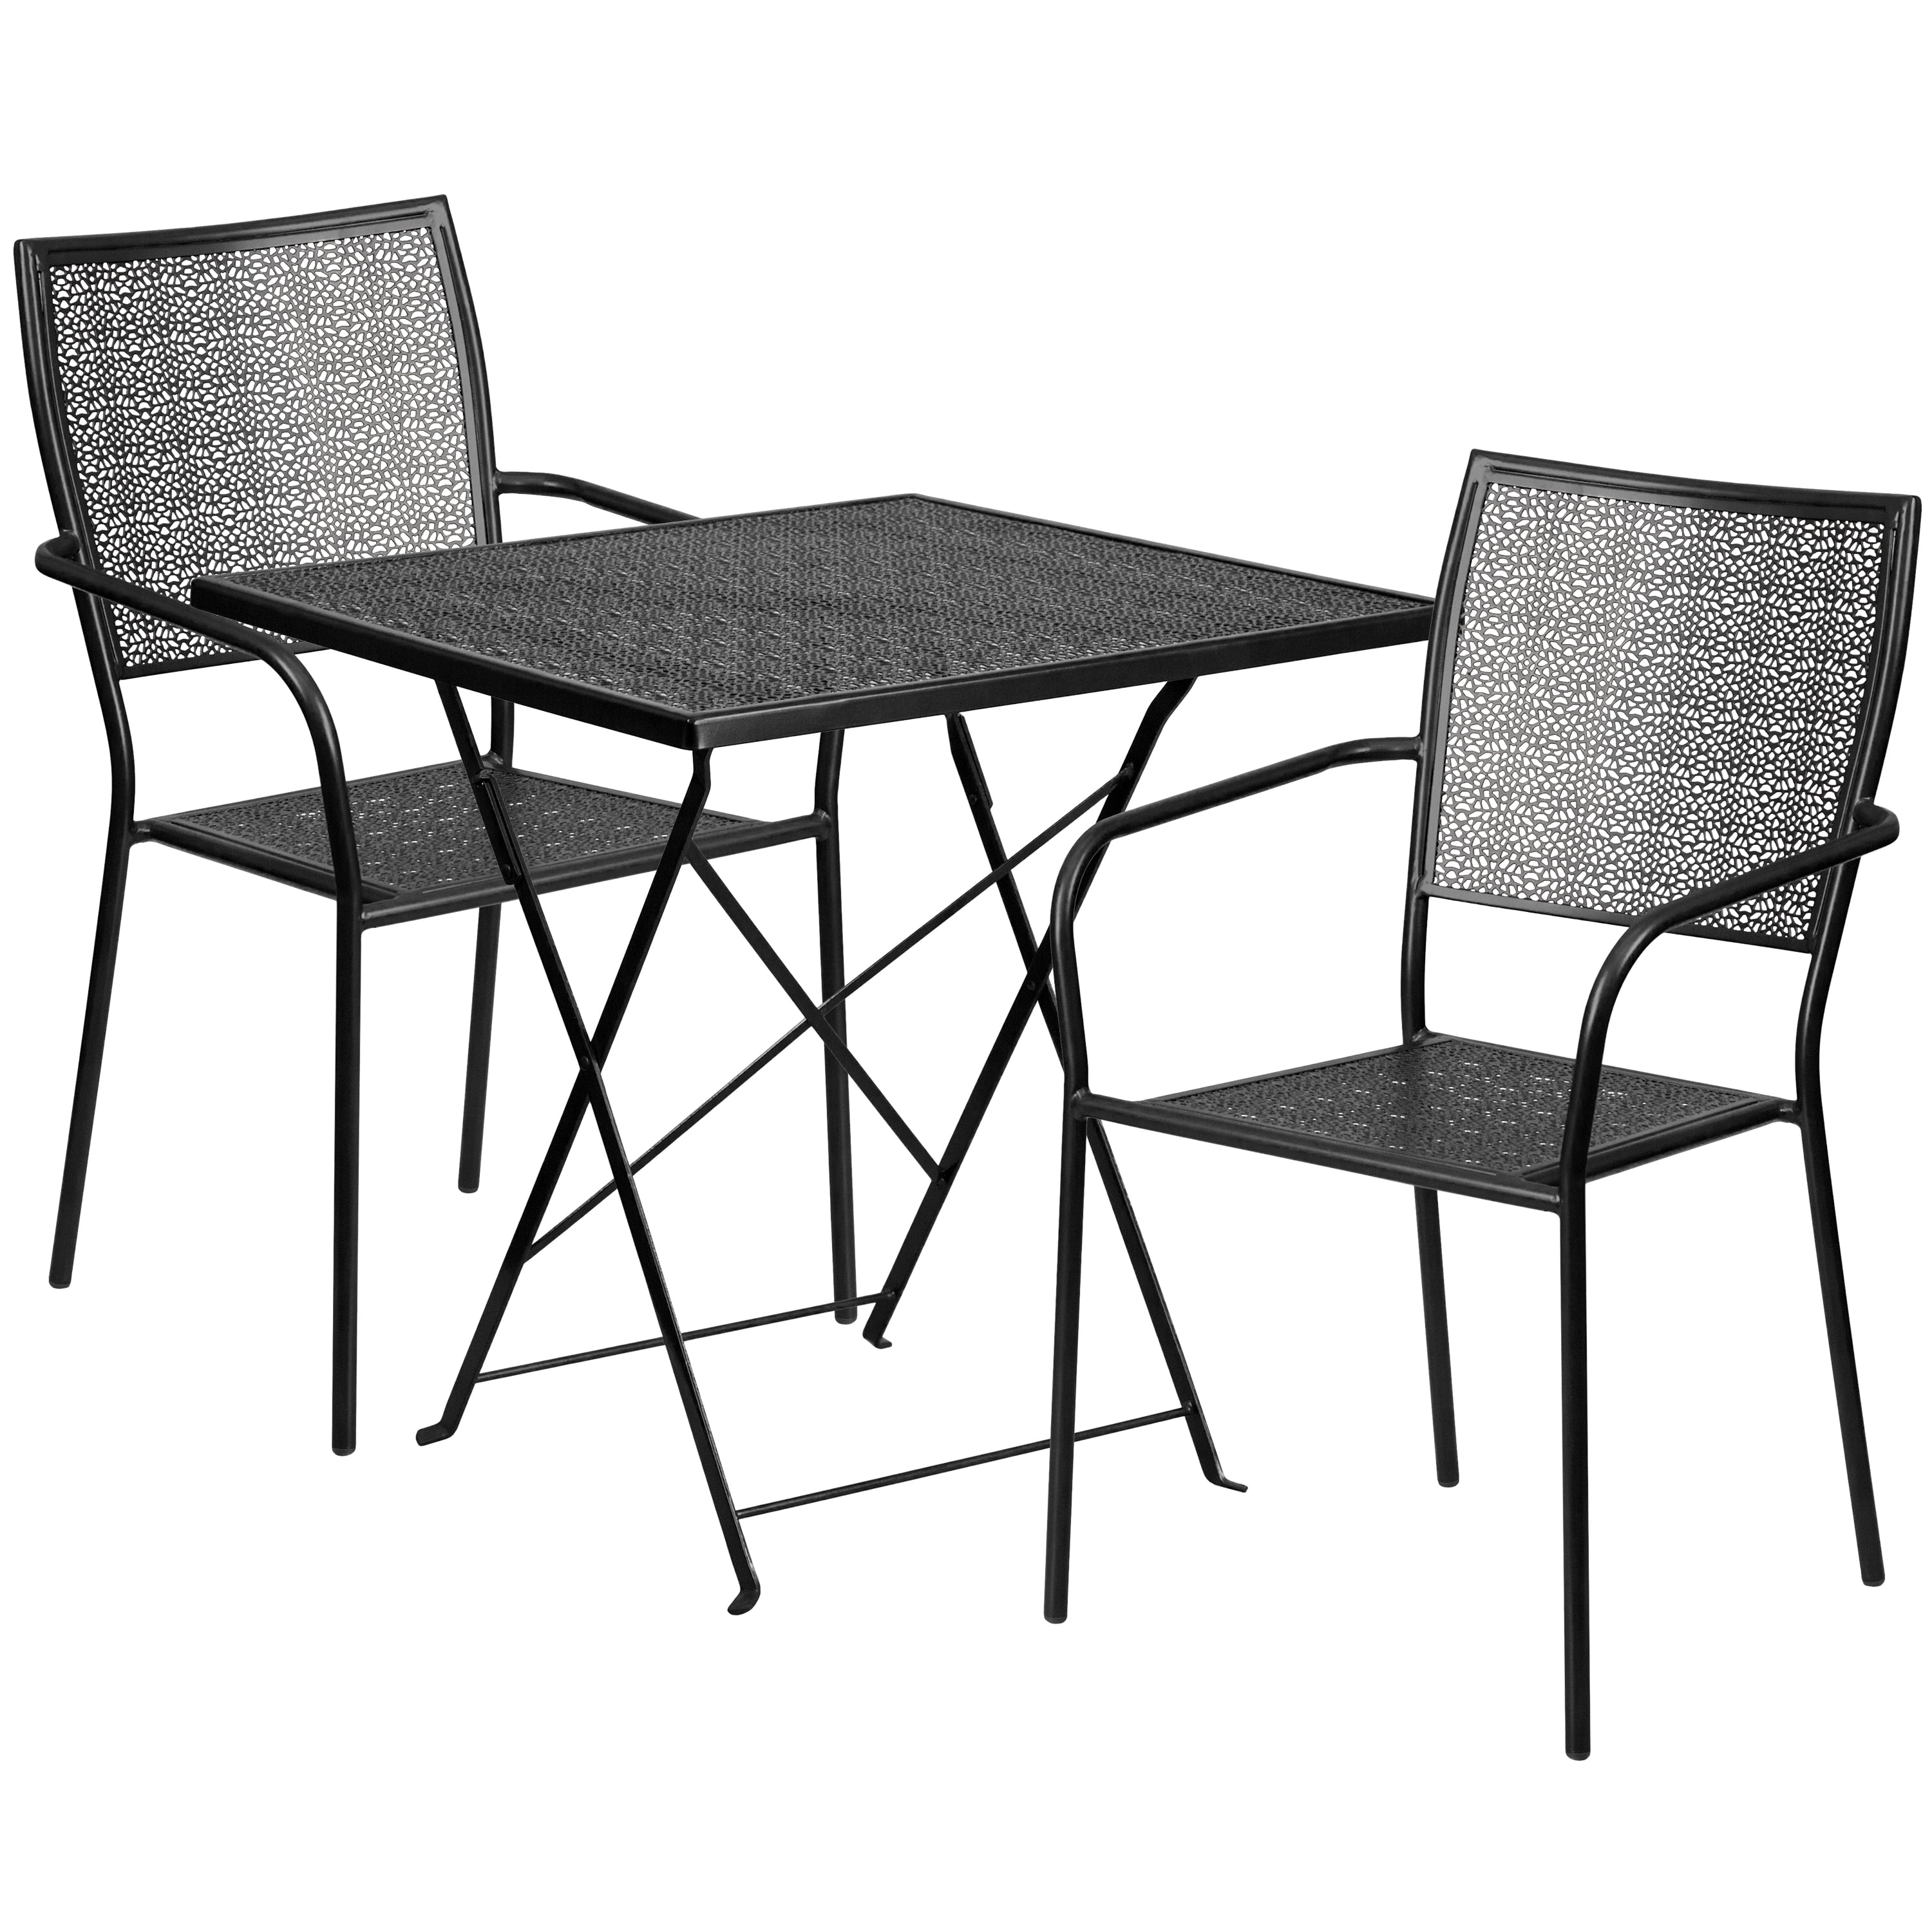 Flash Furniture Oia Commercial Grade 28" Square Black Indoor-Outdoor Steel Folding Patio Table Set with 2 Square Back Chairs - image 1 of 5